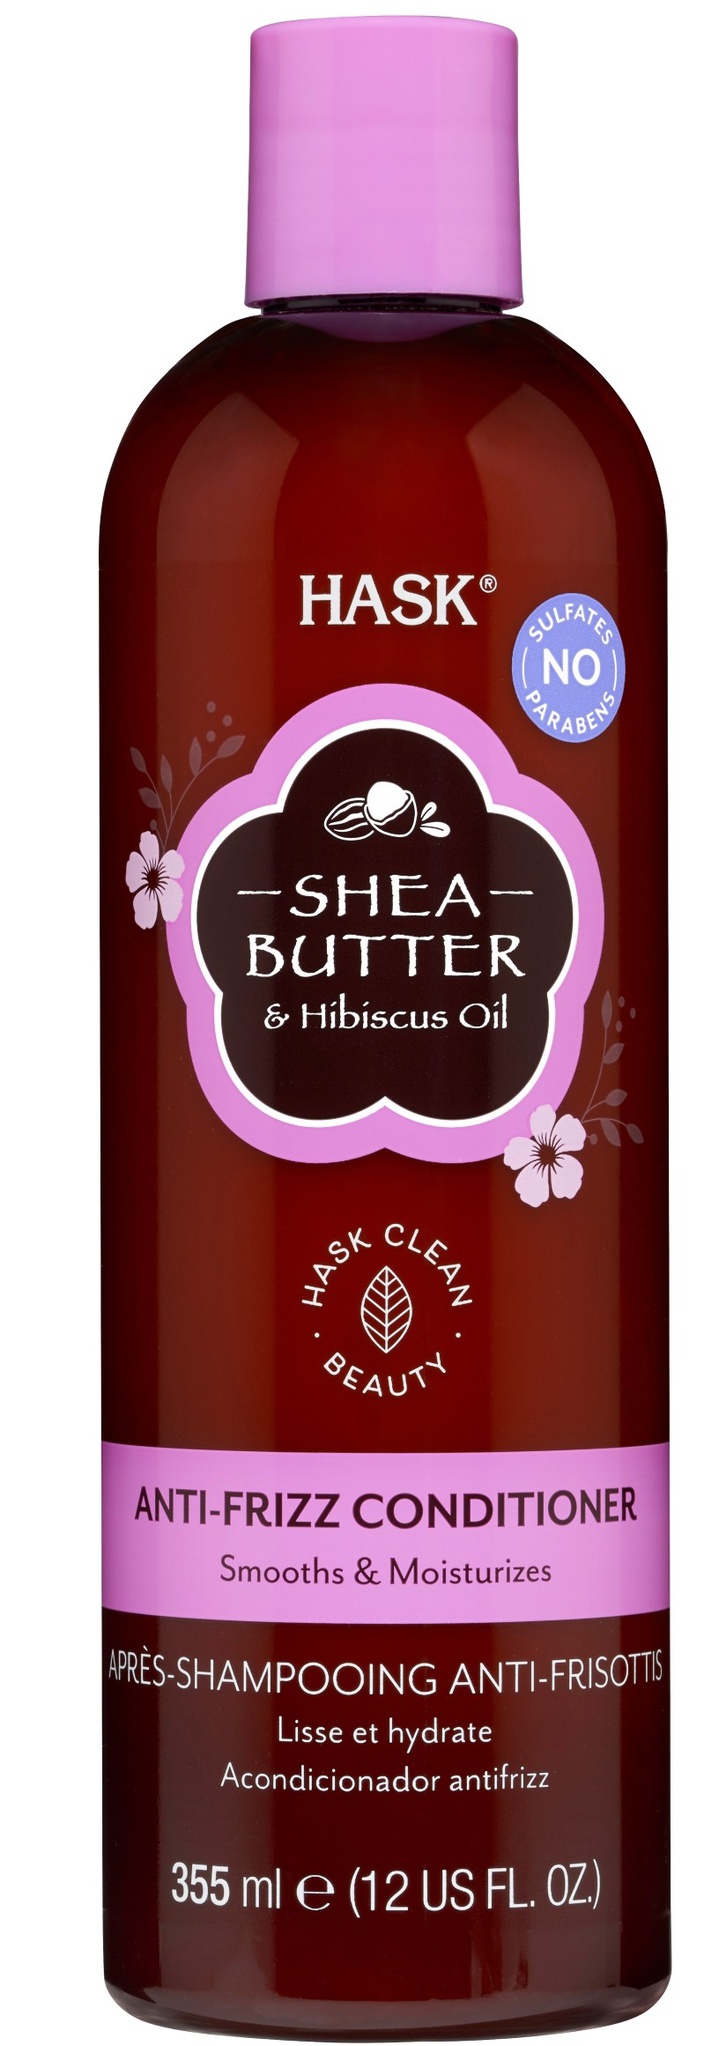 HASK Shea Butter Conditioner Anti-frizz